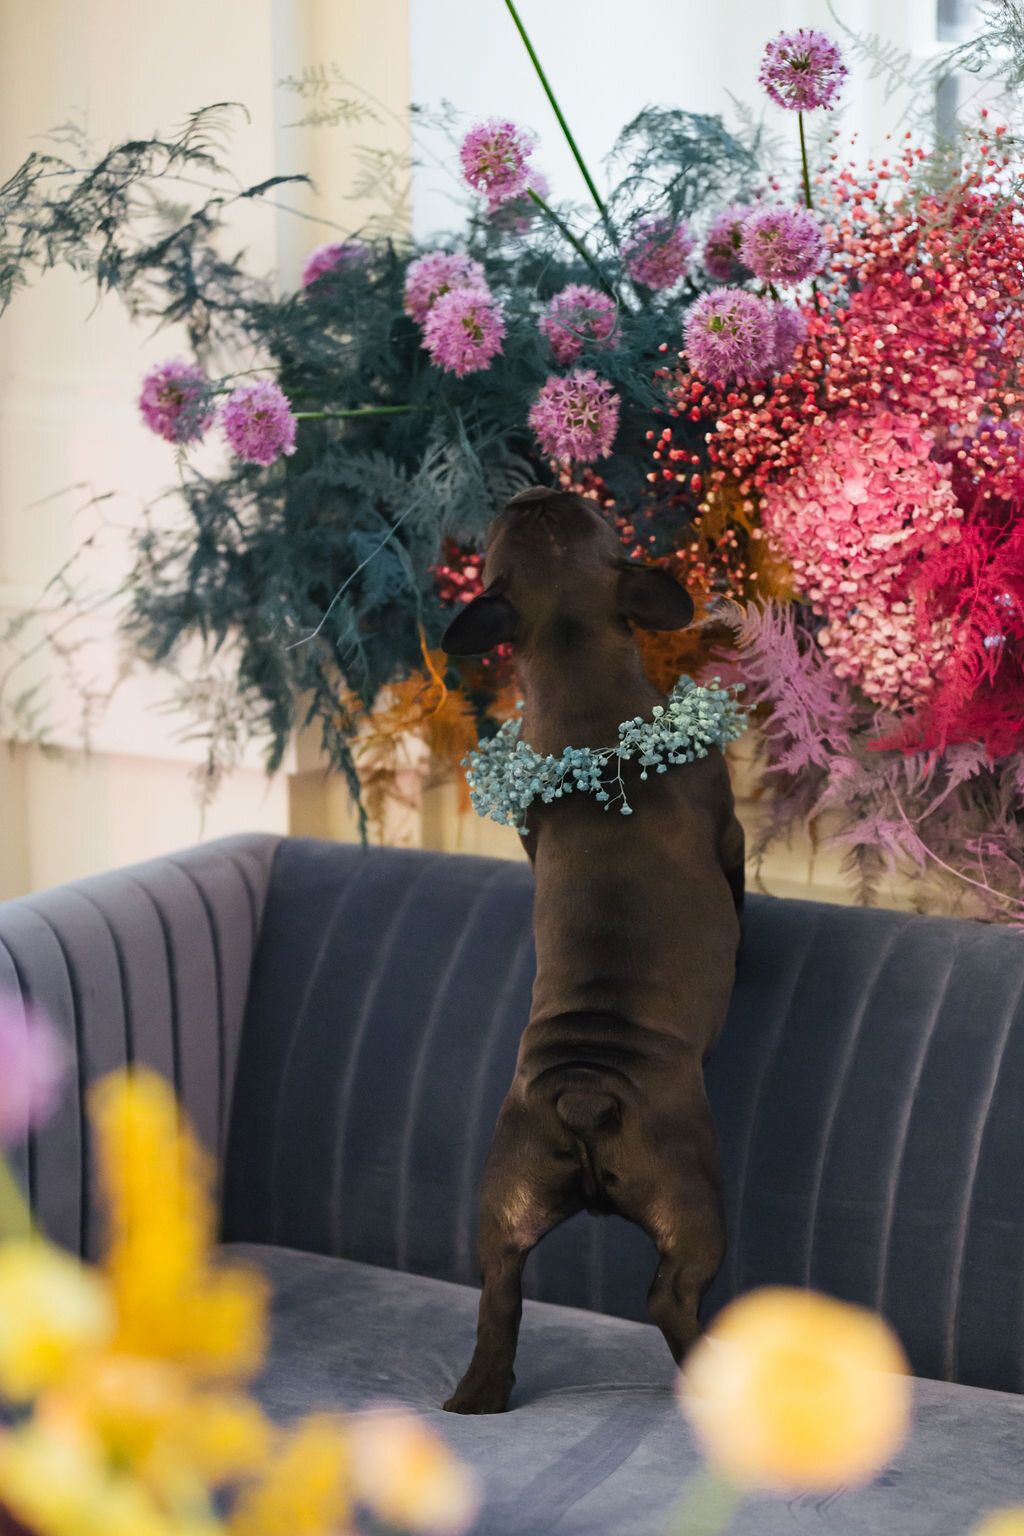 Rainbow colored floral installation with painted and dyed baby’s breath and plums ferns. Modern, minimal, colorful wedding flowers at the Noelle Hotel in downtown Nashville. Bright flower collar for a frenchie bulldog!